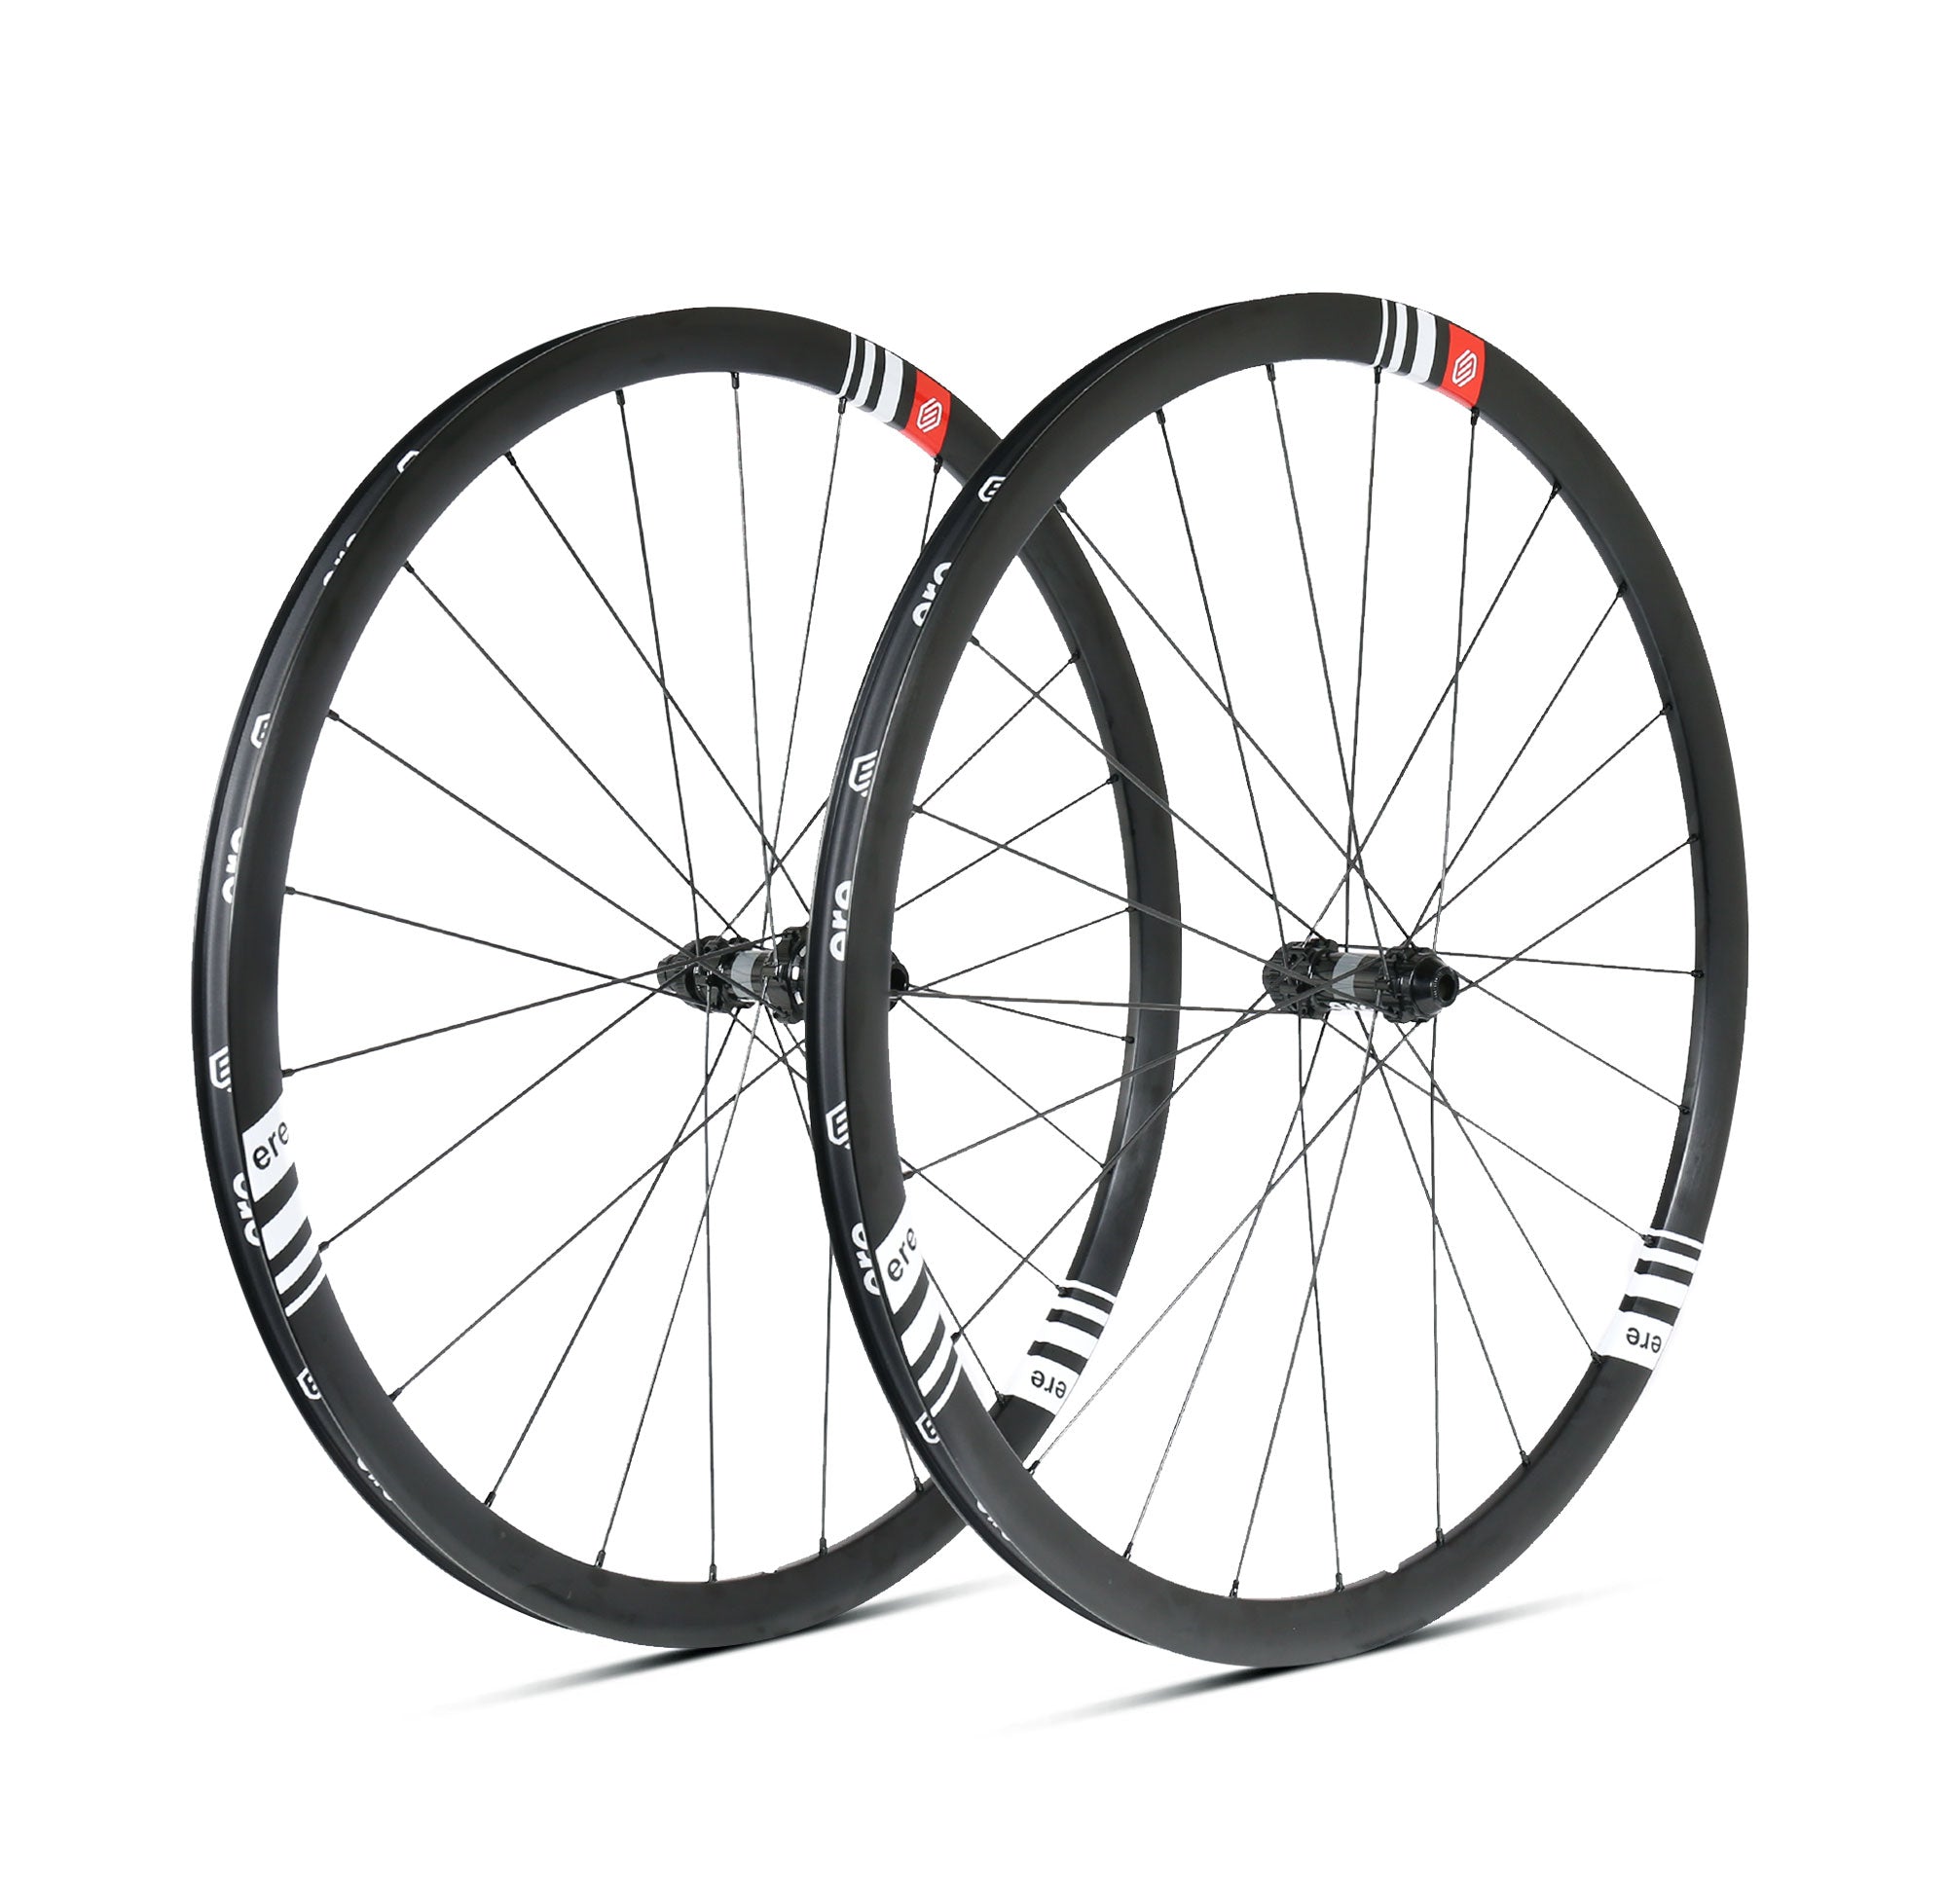 Ere Explorator wheels and Tenaci tires tested and rated by Velozine.nl